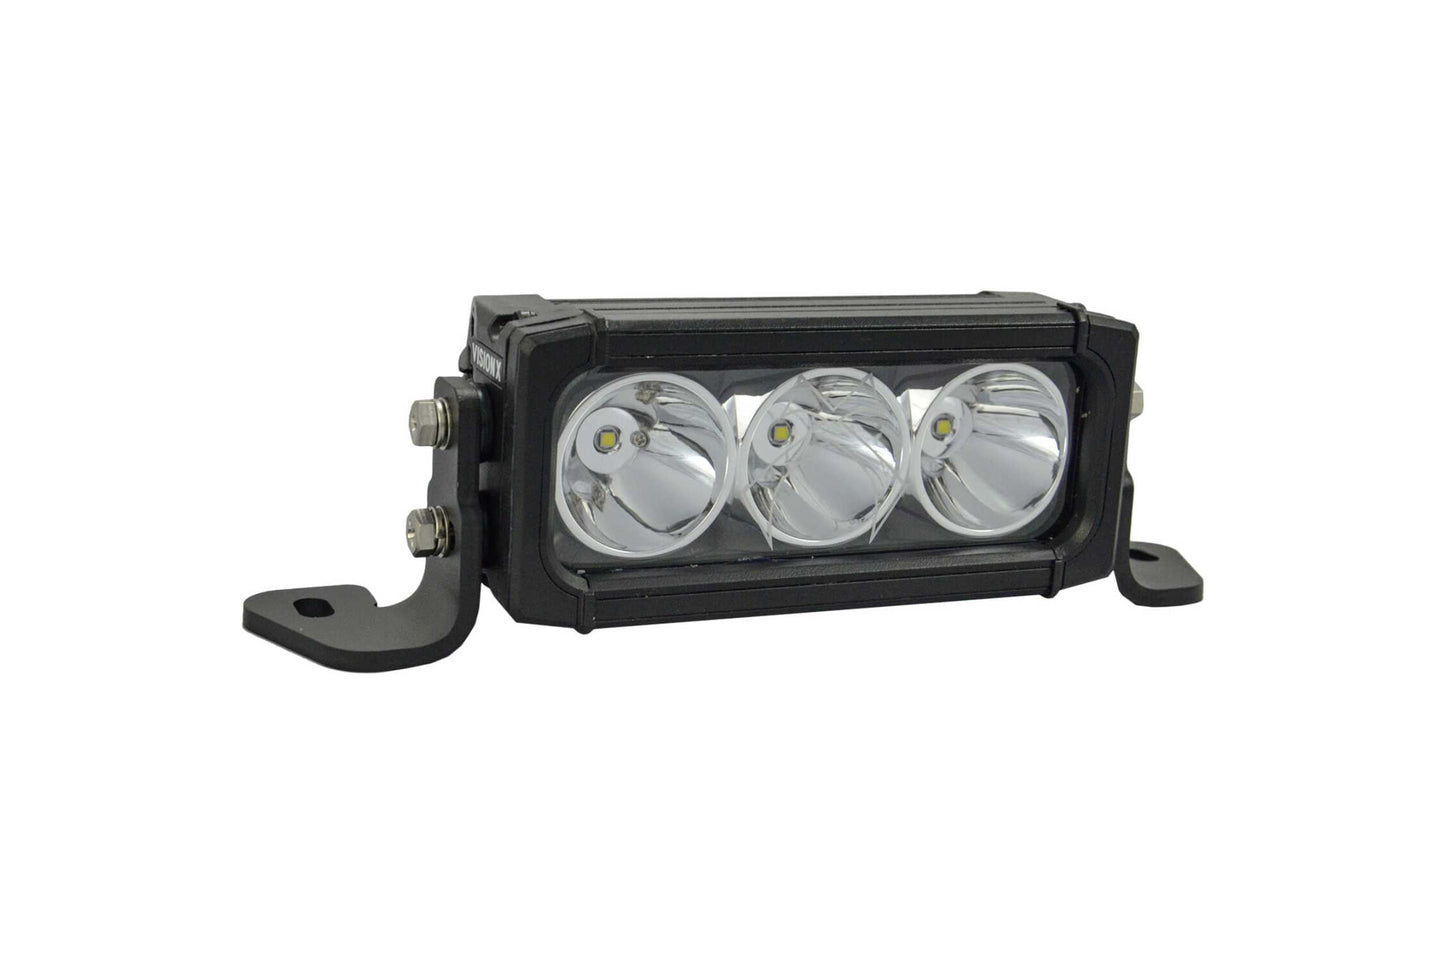 Vision X Light Bar: 46in (24-LED / XPR-S / Xtreme Distance Spot Beam / with Halo)